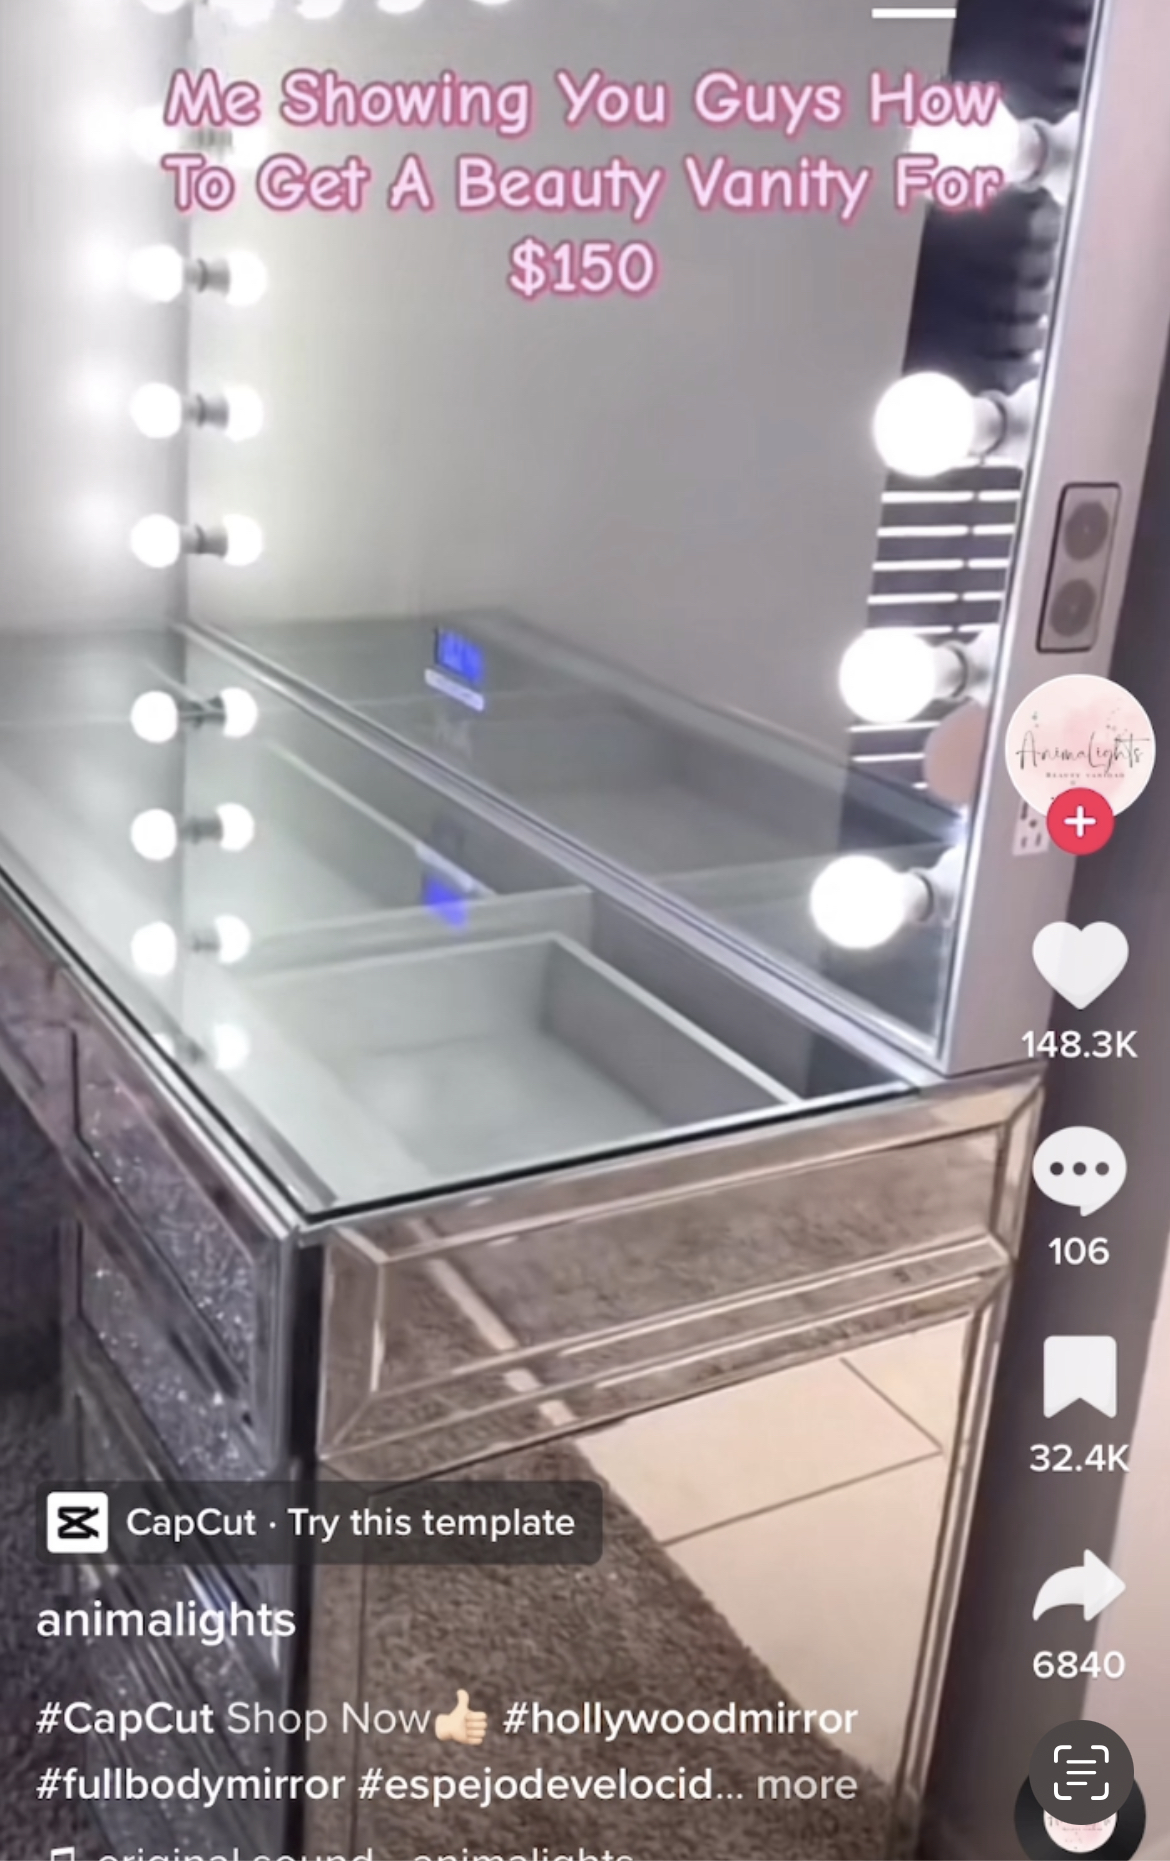 A website being promoted on TikTok is saying that they are selling their vanities at a reasonable price!! 